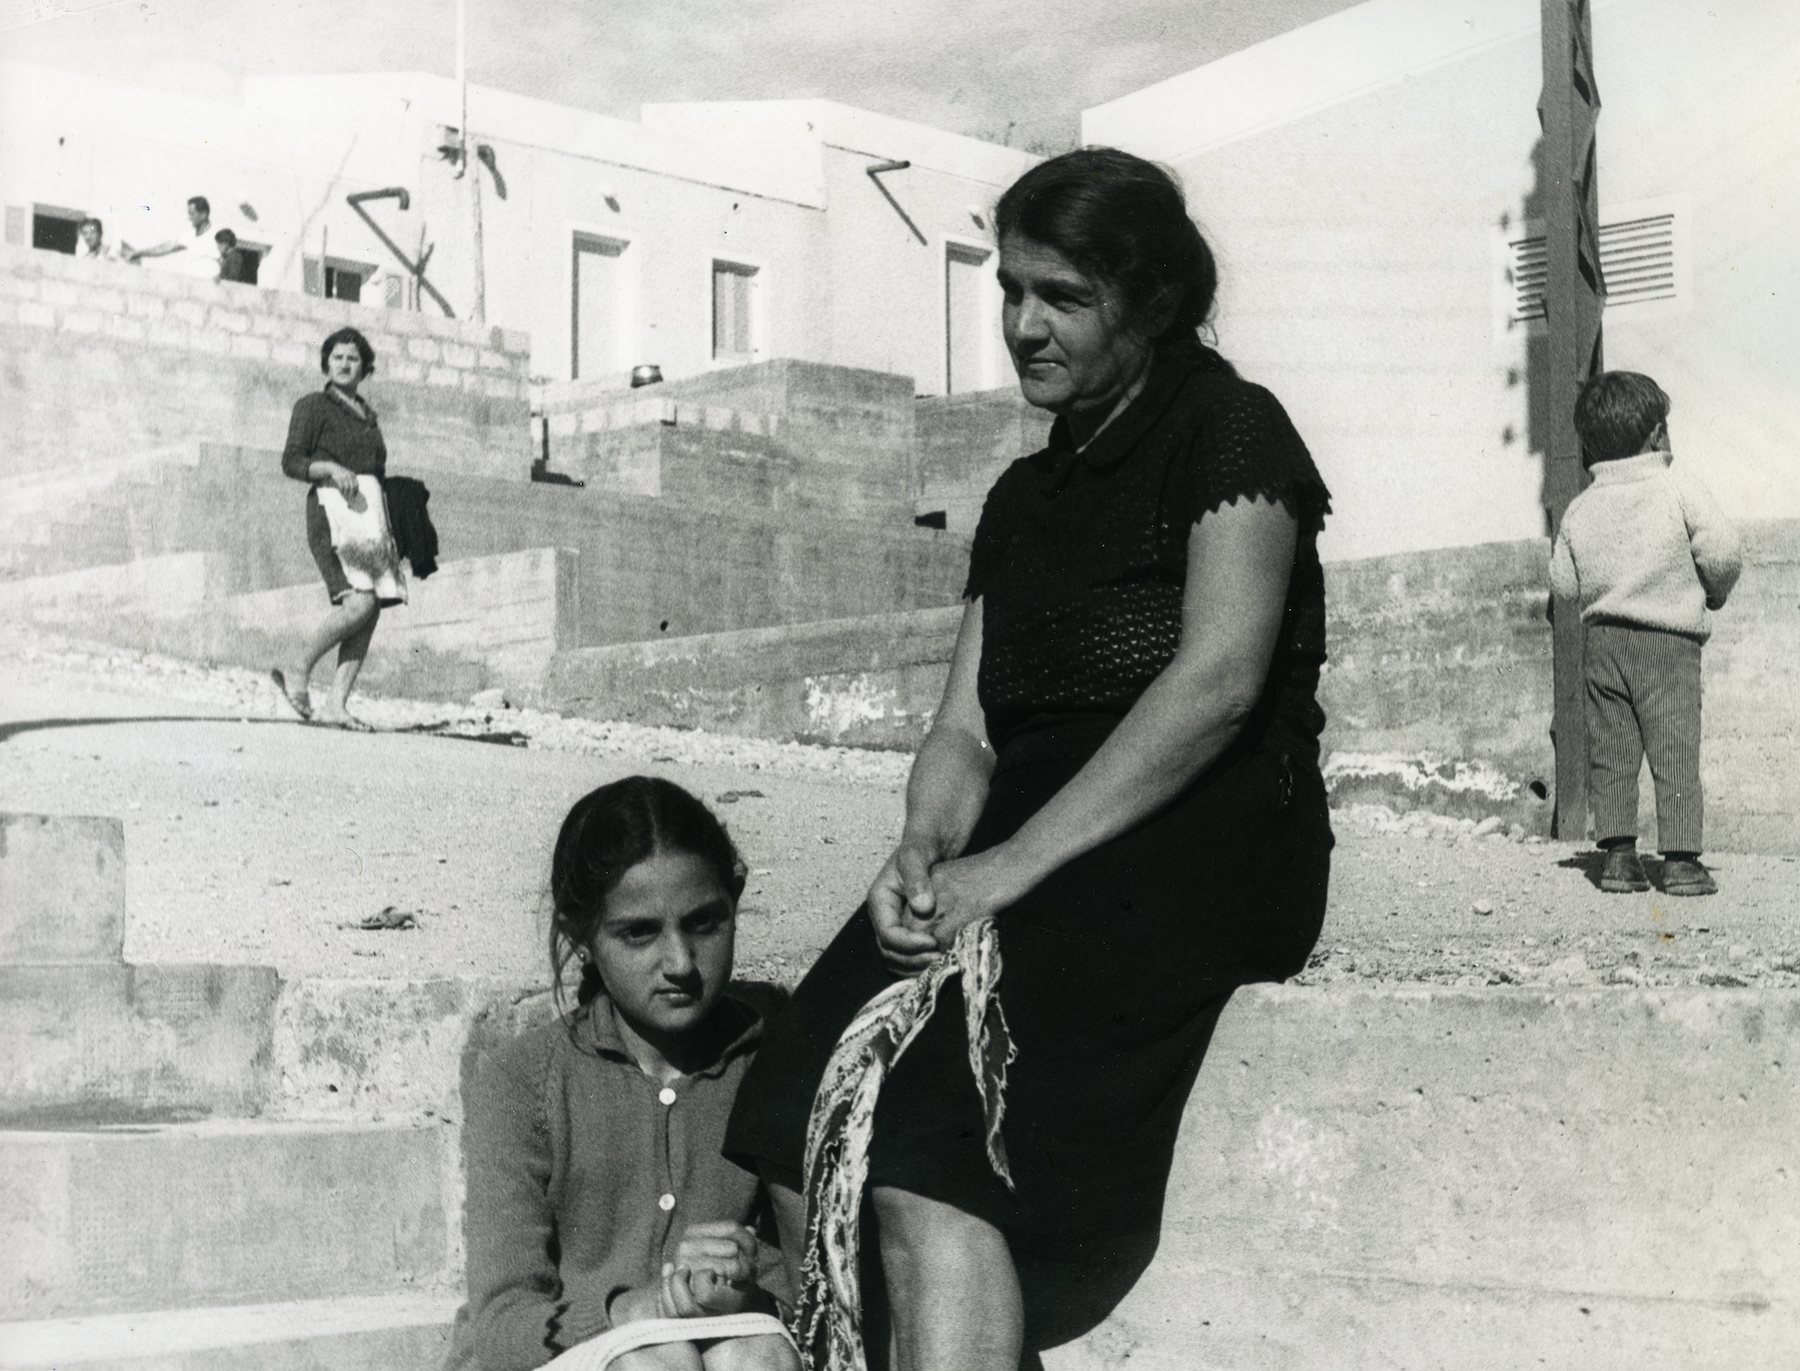 An Assyrian mother and child sit outside a refugee housing settlement in Lebanon’s Bekaa Valley in 1969